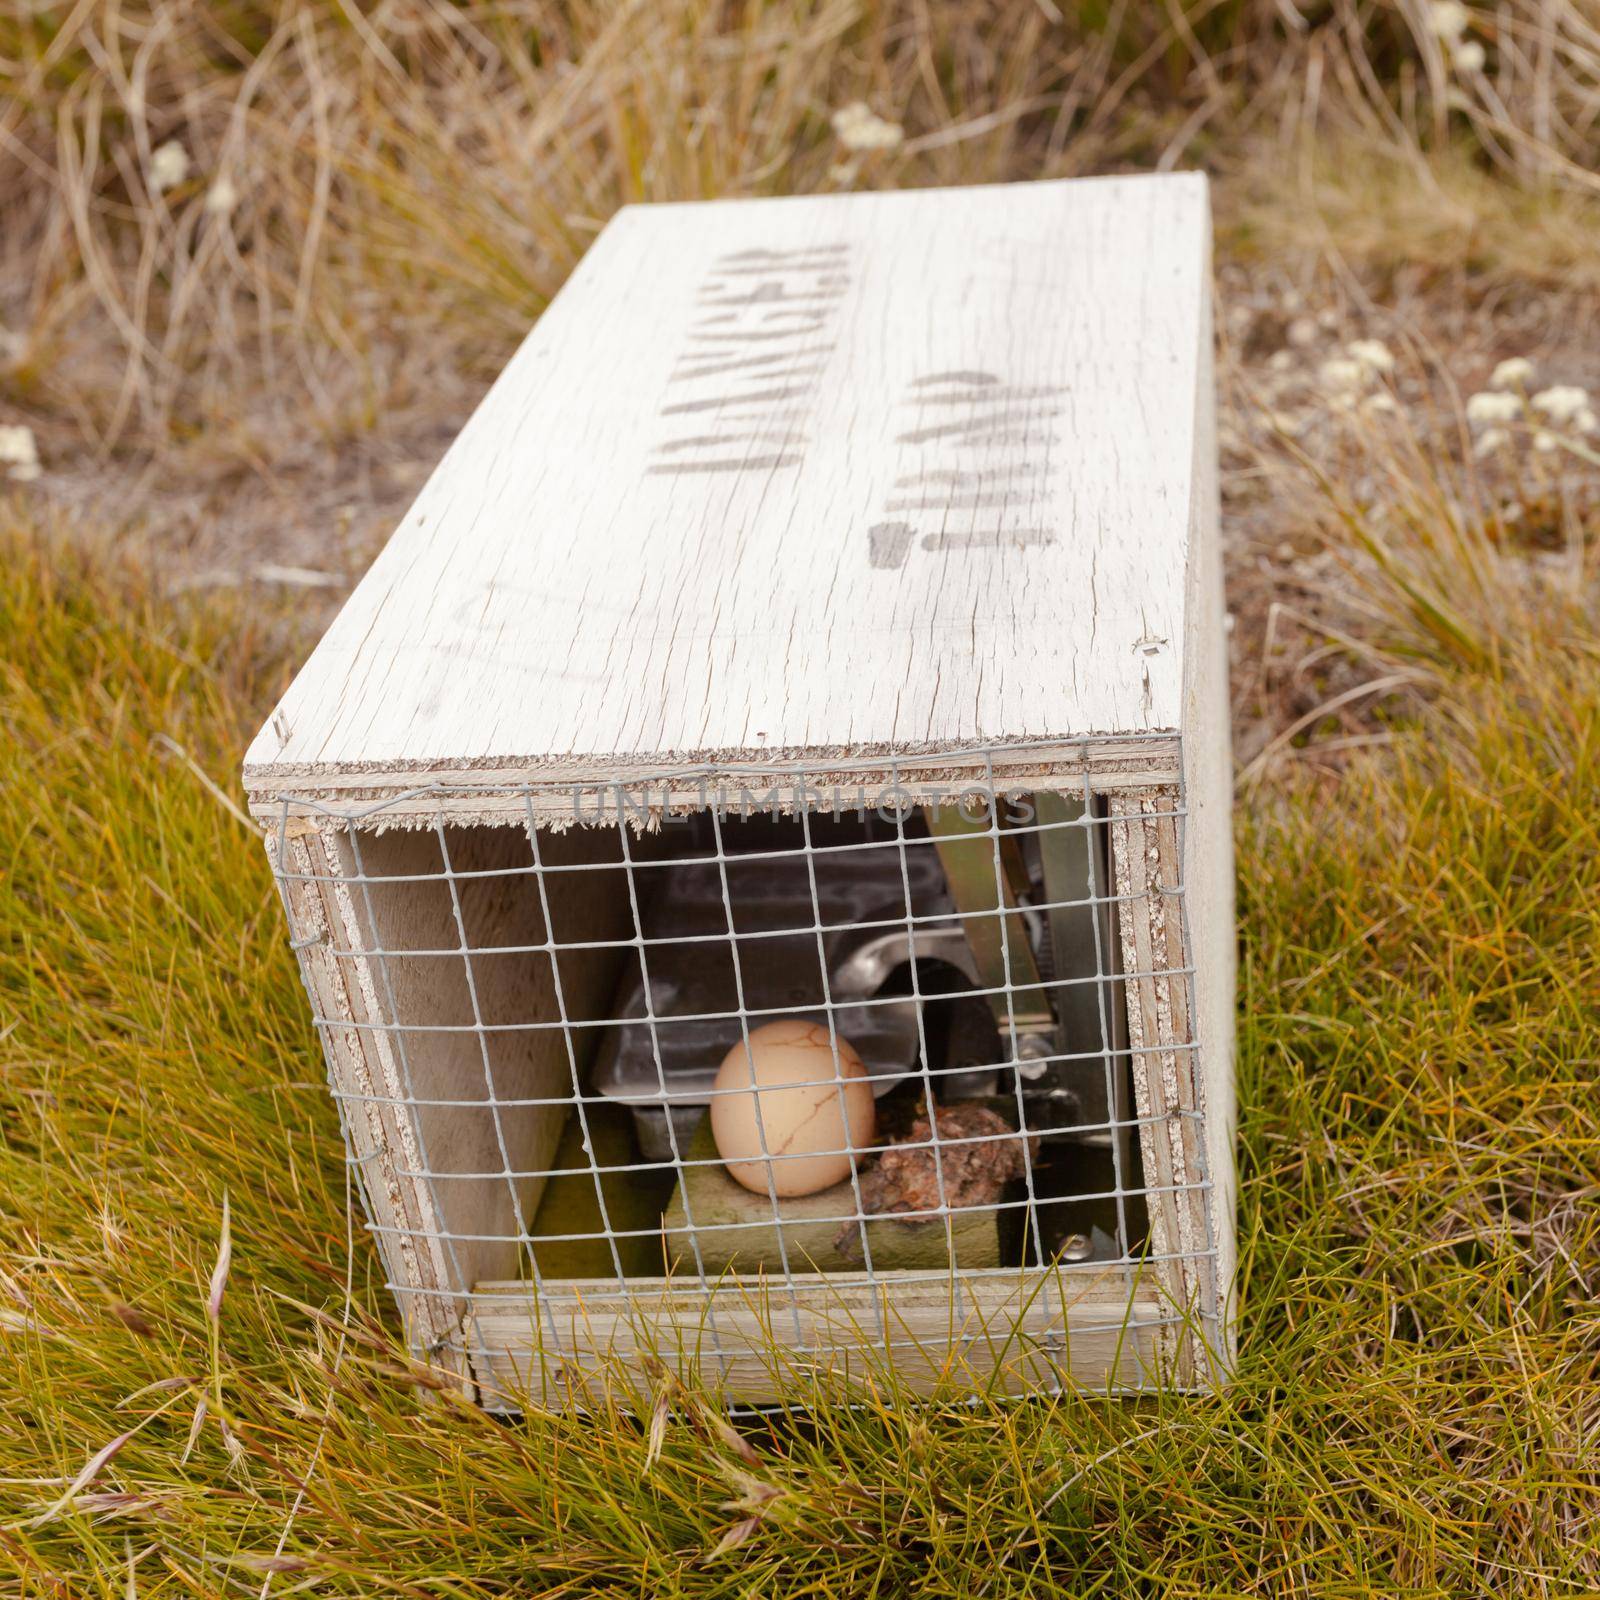 Small animal trap with written warning for humans by PiLens